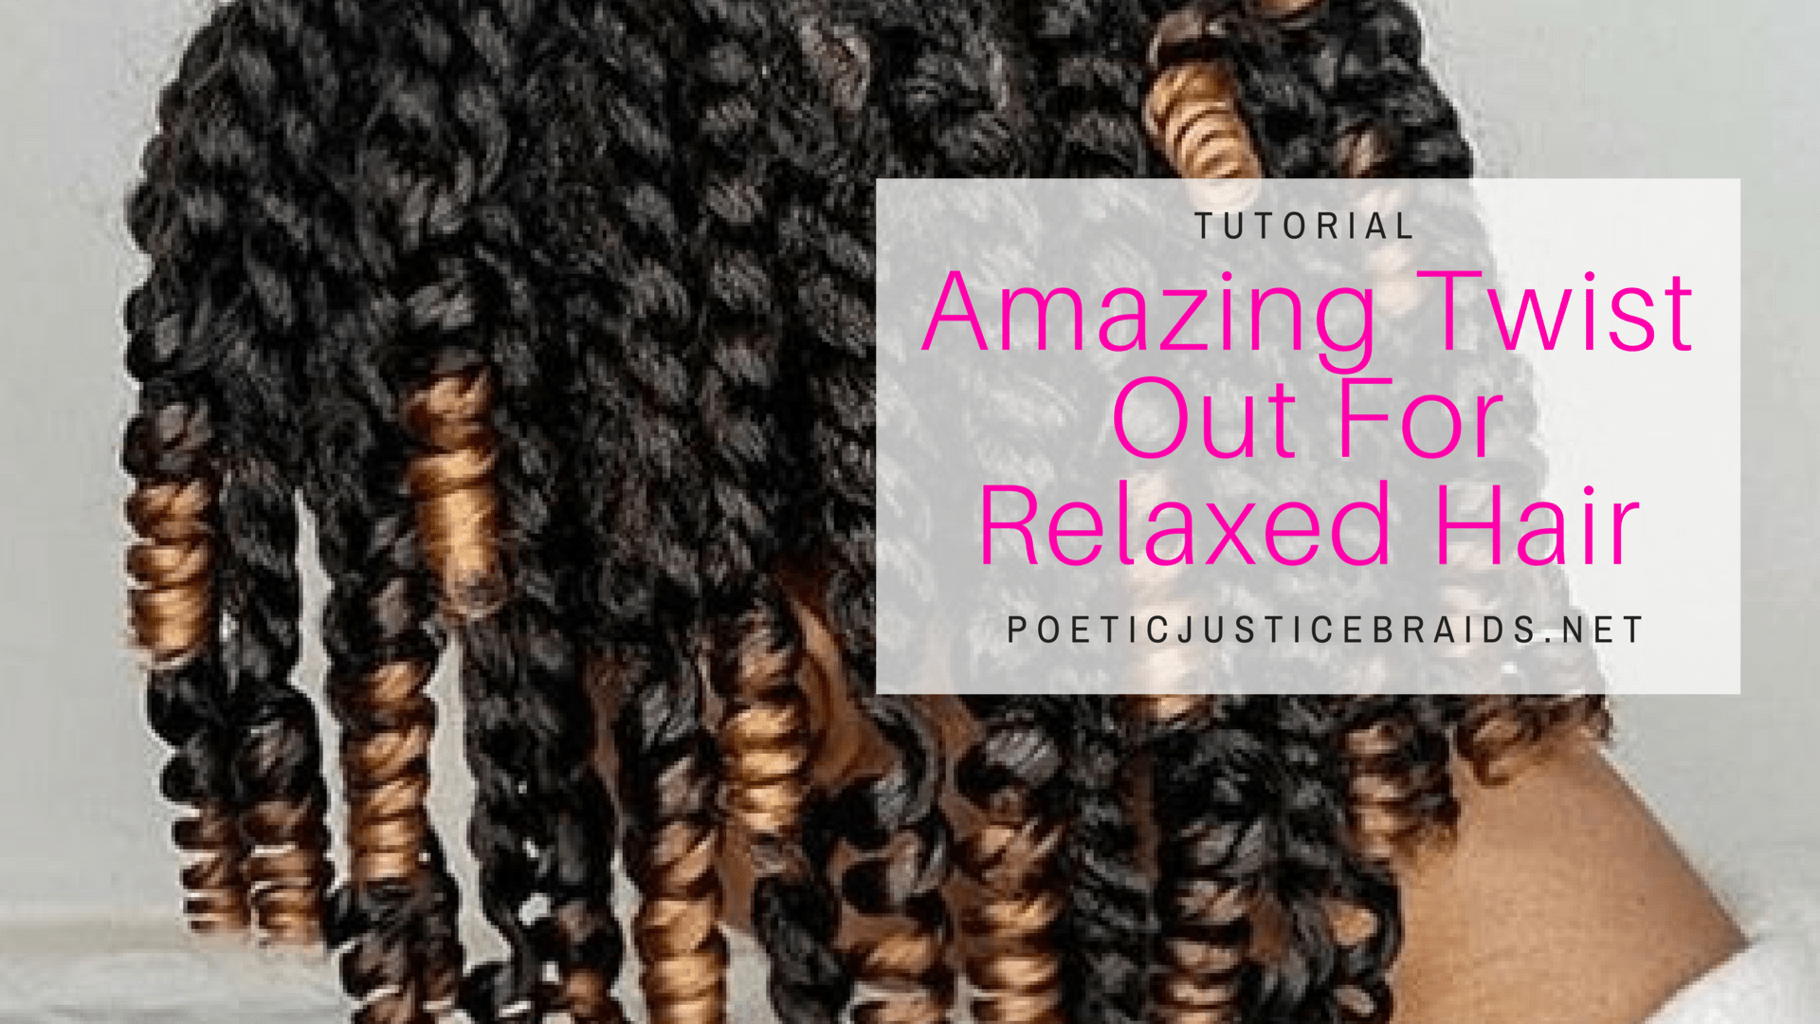 Amazing Twist Out For Relaxed Hair w/ Video Tutorials